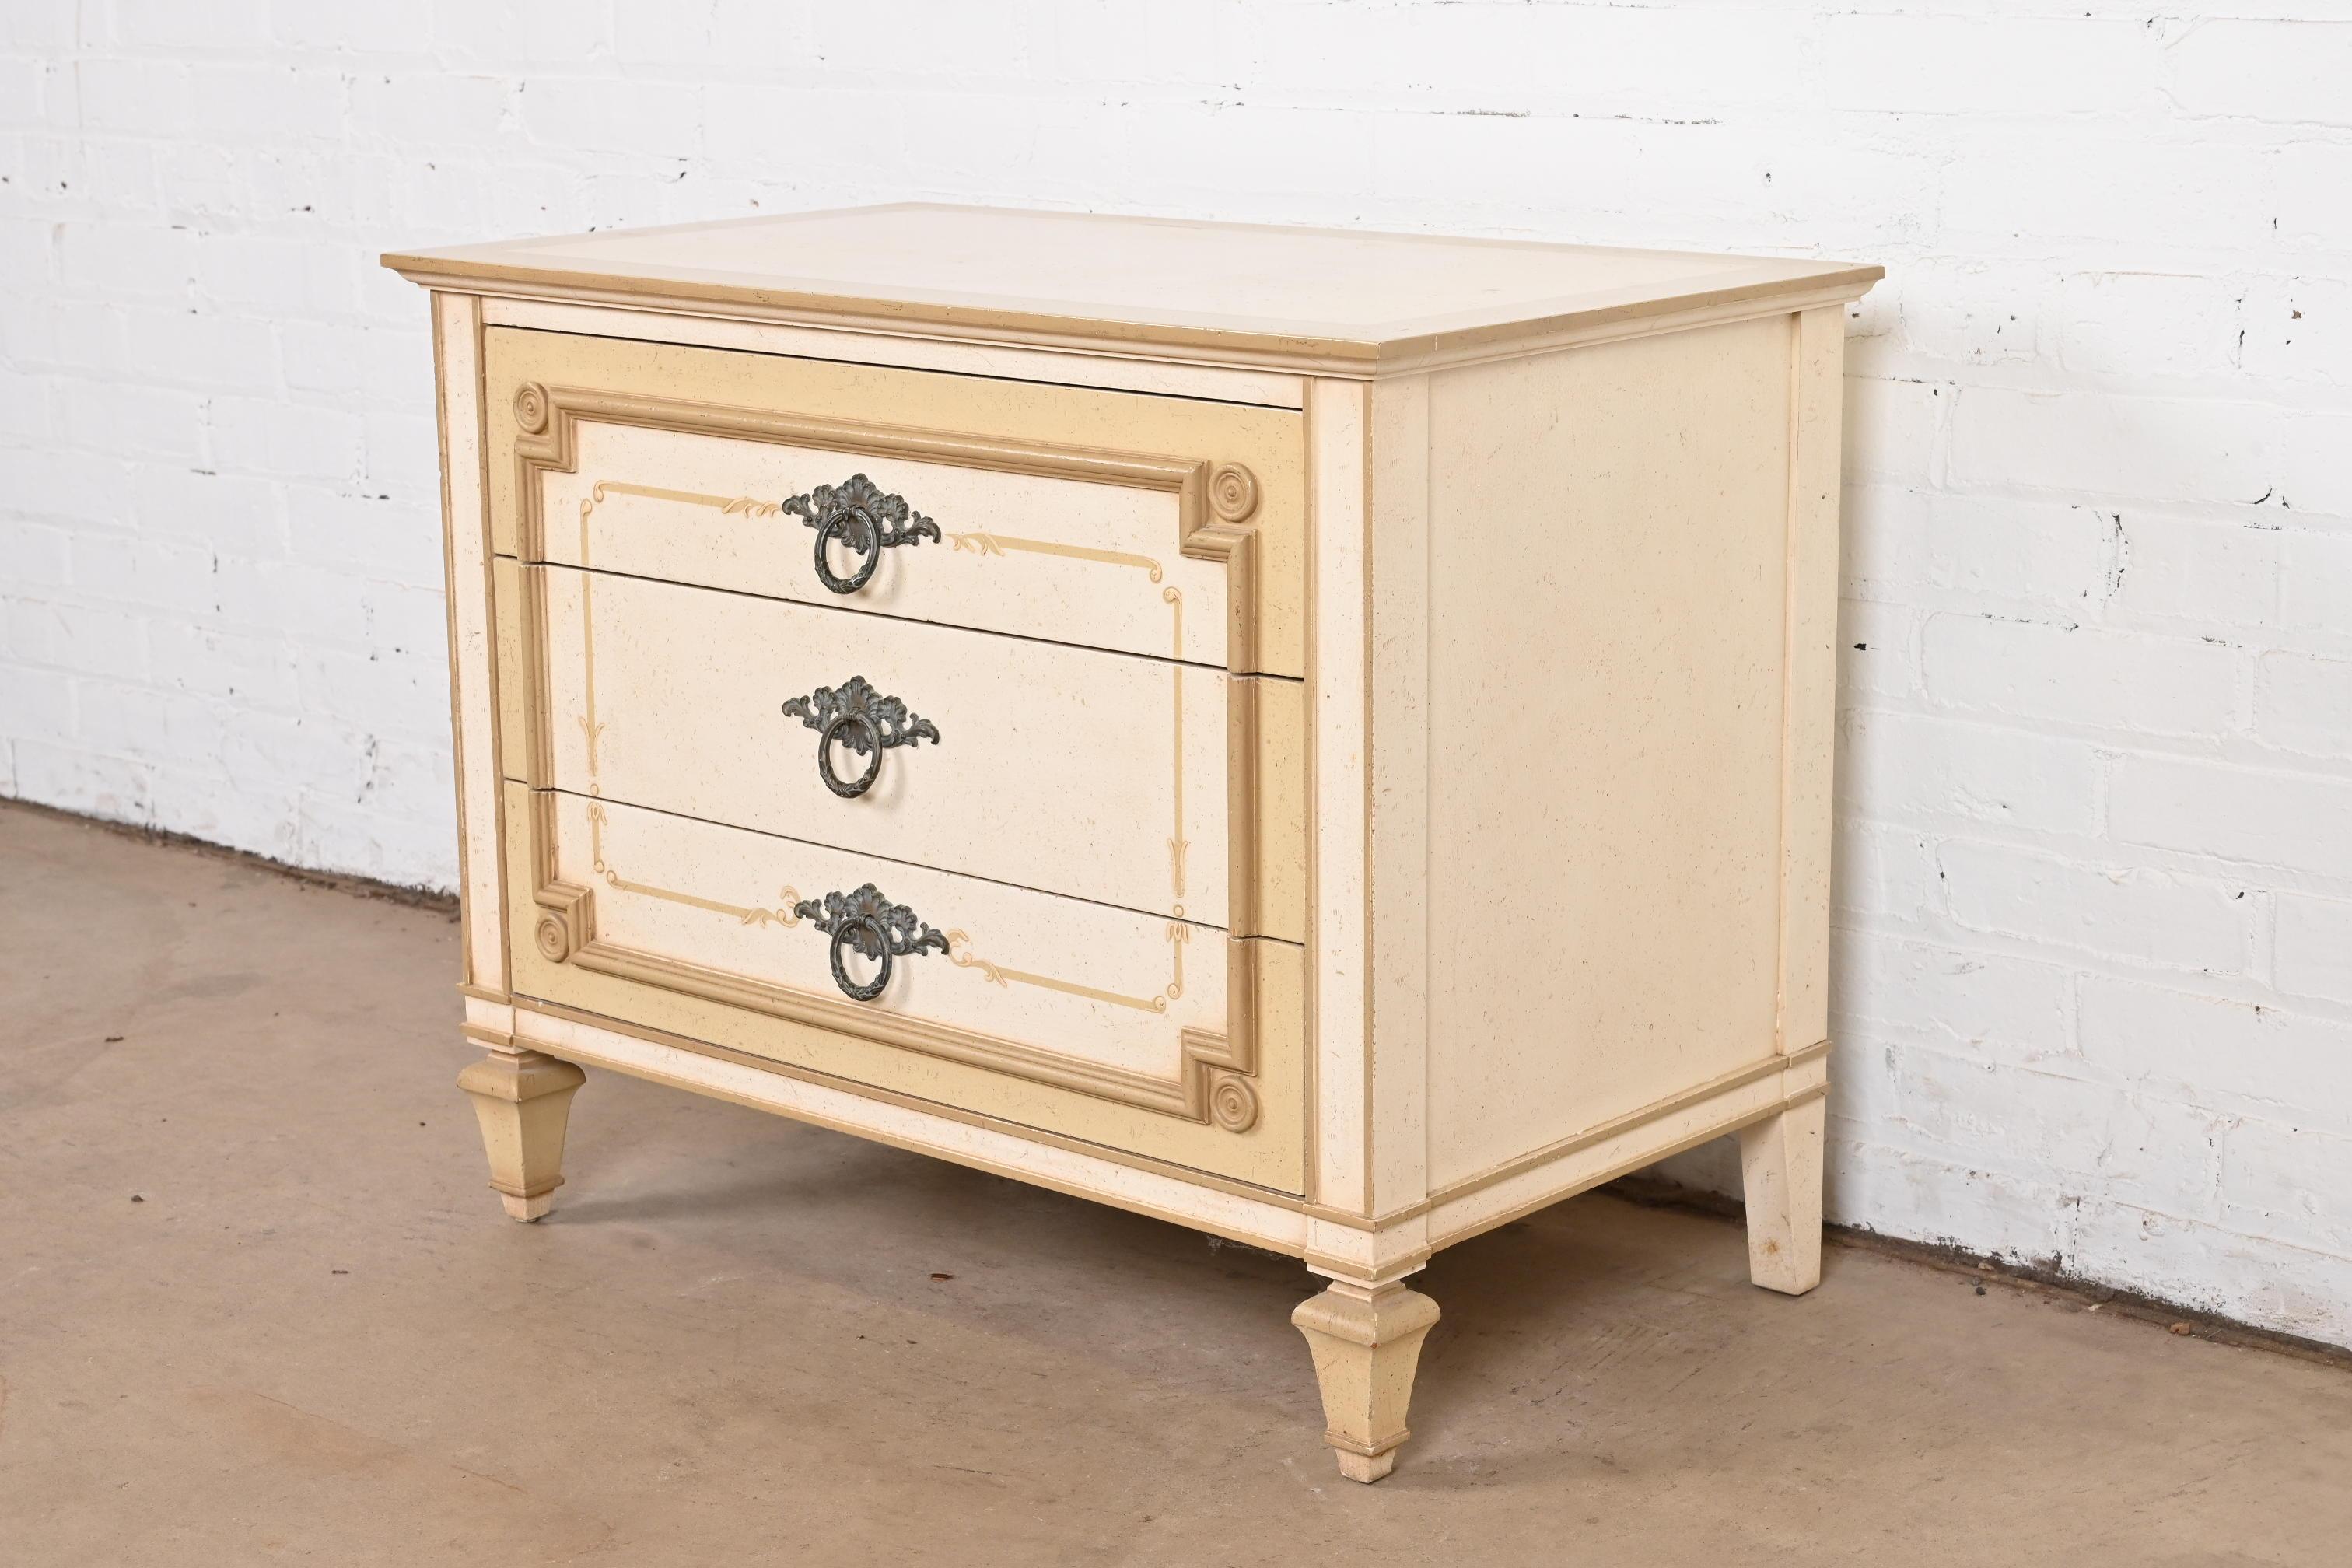 A gorgeous French Regency Louis XVI style painted three-drawer bachelor chest or bedside chest

By John Widdicomb

USA, Circa 1960s

Carved walnut in cream and taupe, with original brass hardware.

Measures: 30